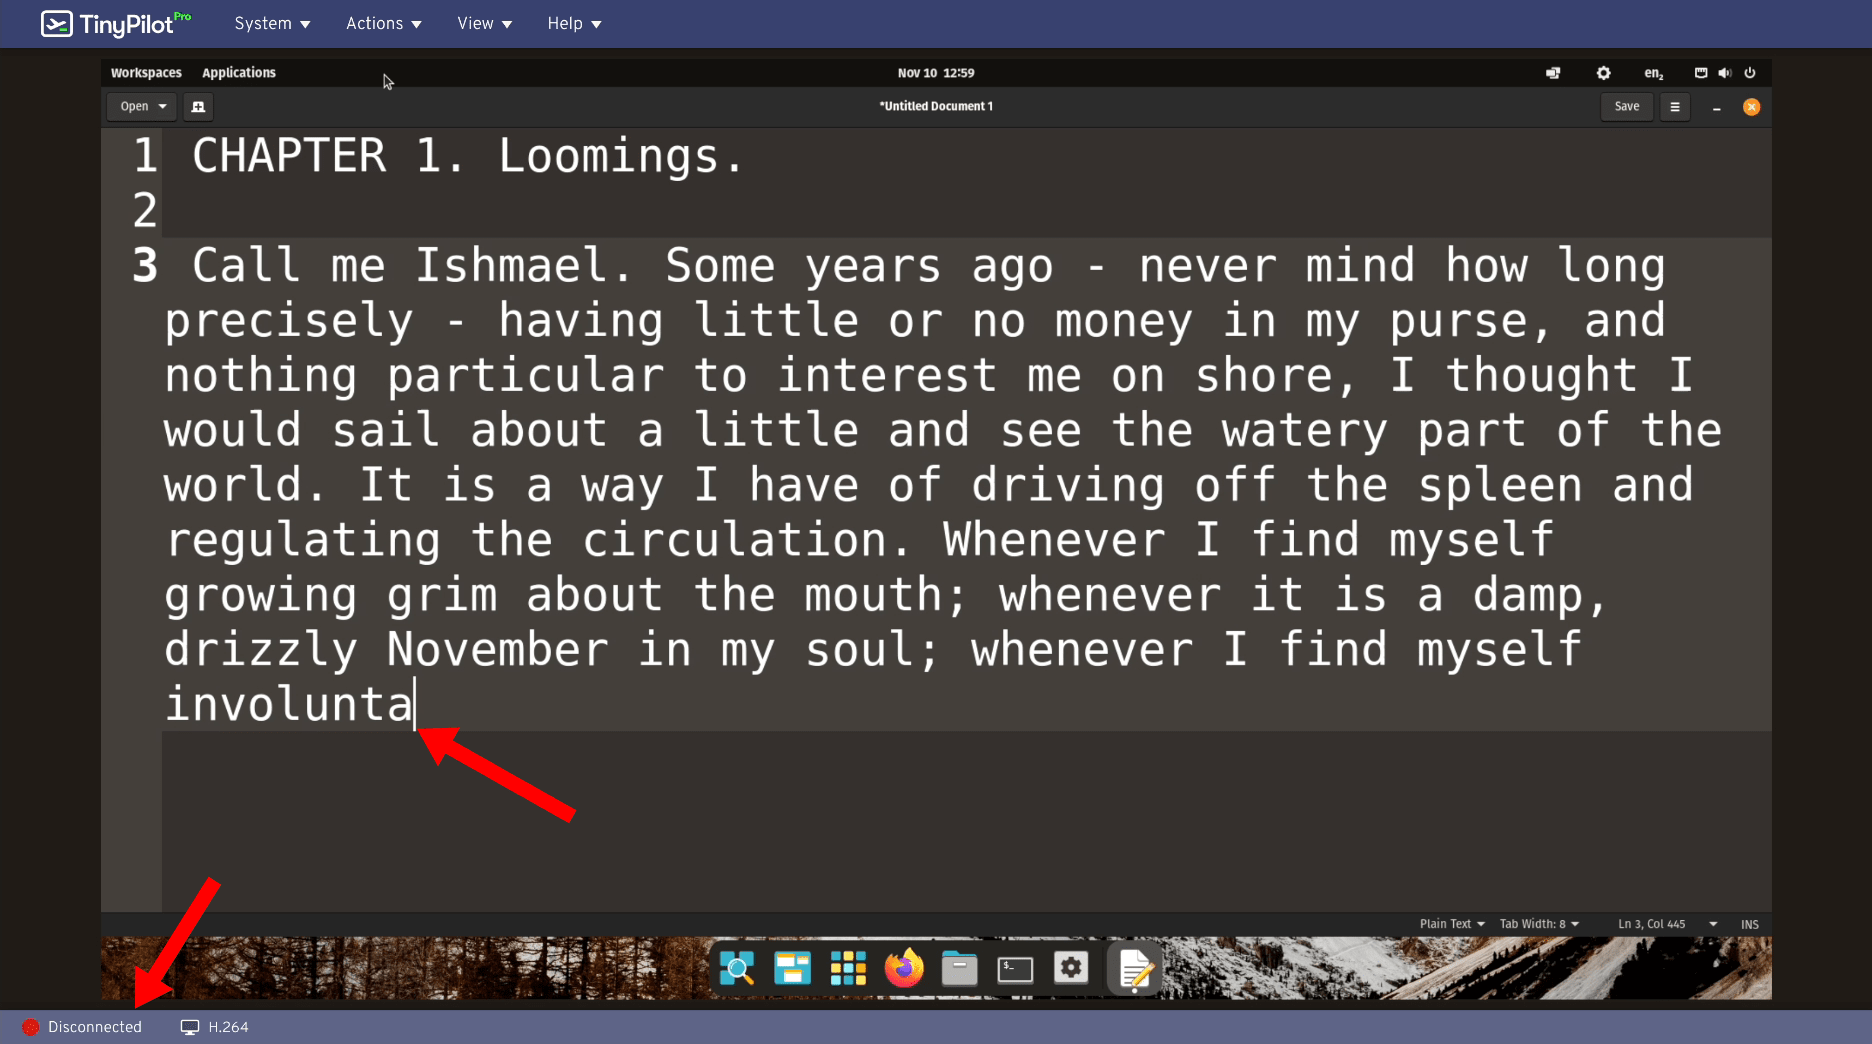 A screenshot of the TinyPilot web interface in TinyPilot Pro 2.6.1. A text editor is open on a remote PC. The text is cut off part way through pasting.